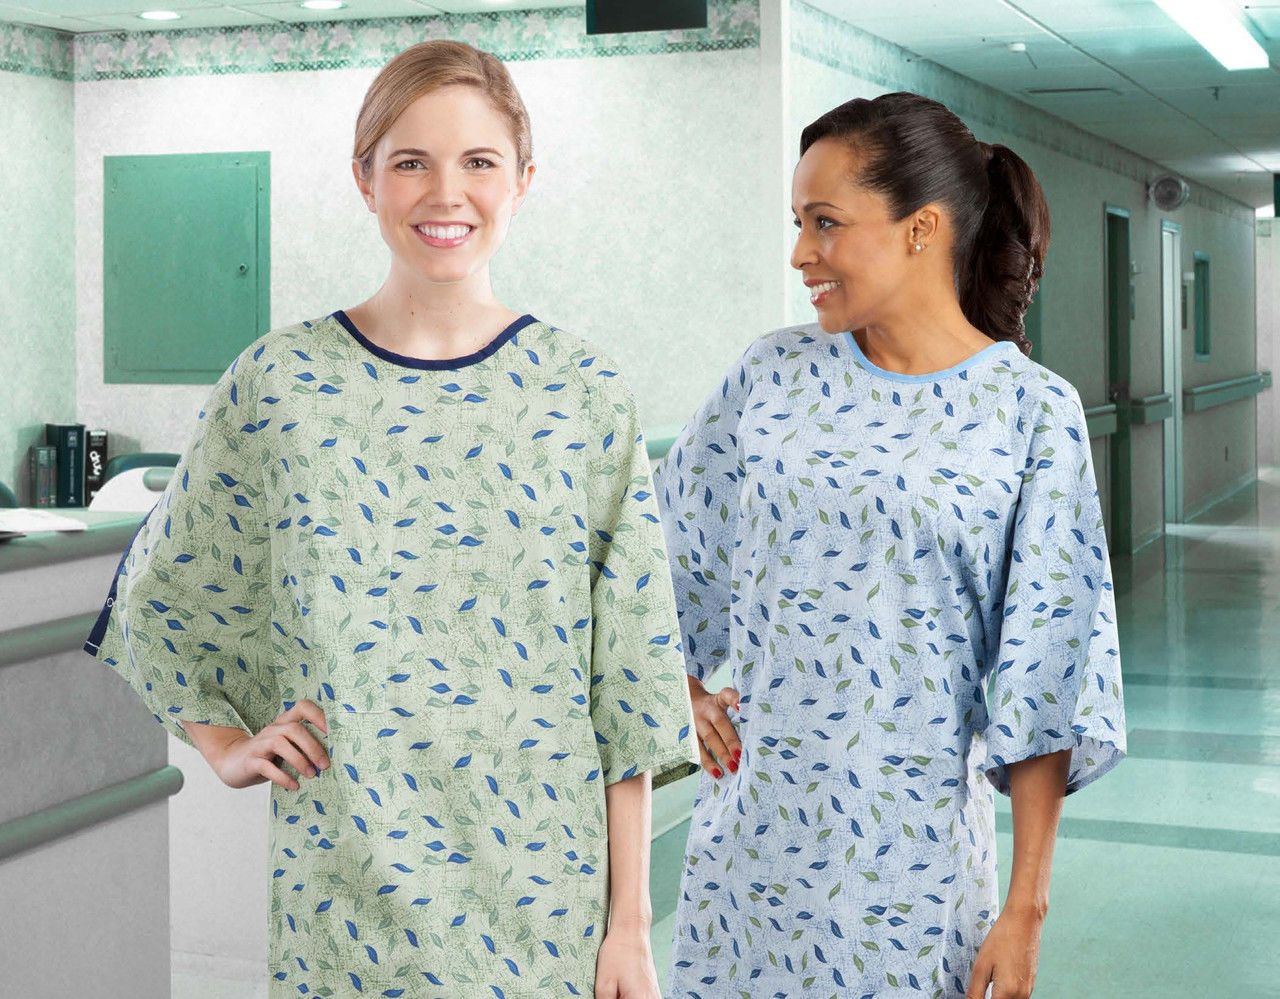 Does the size of ADI's polyester patient gowns represent American sizes?